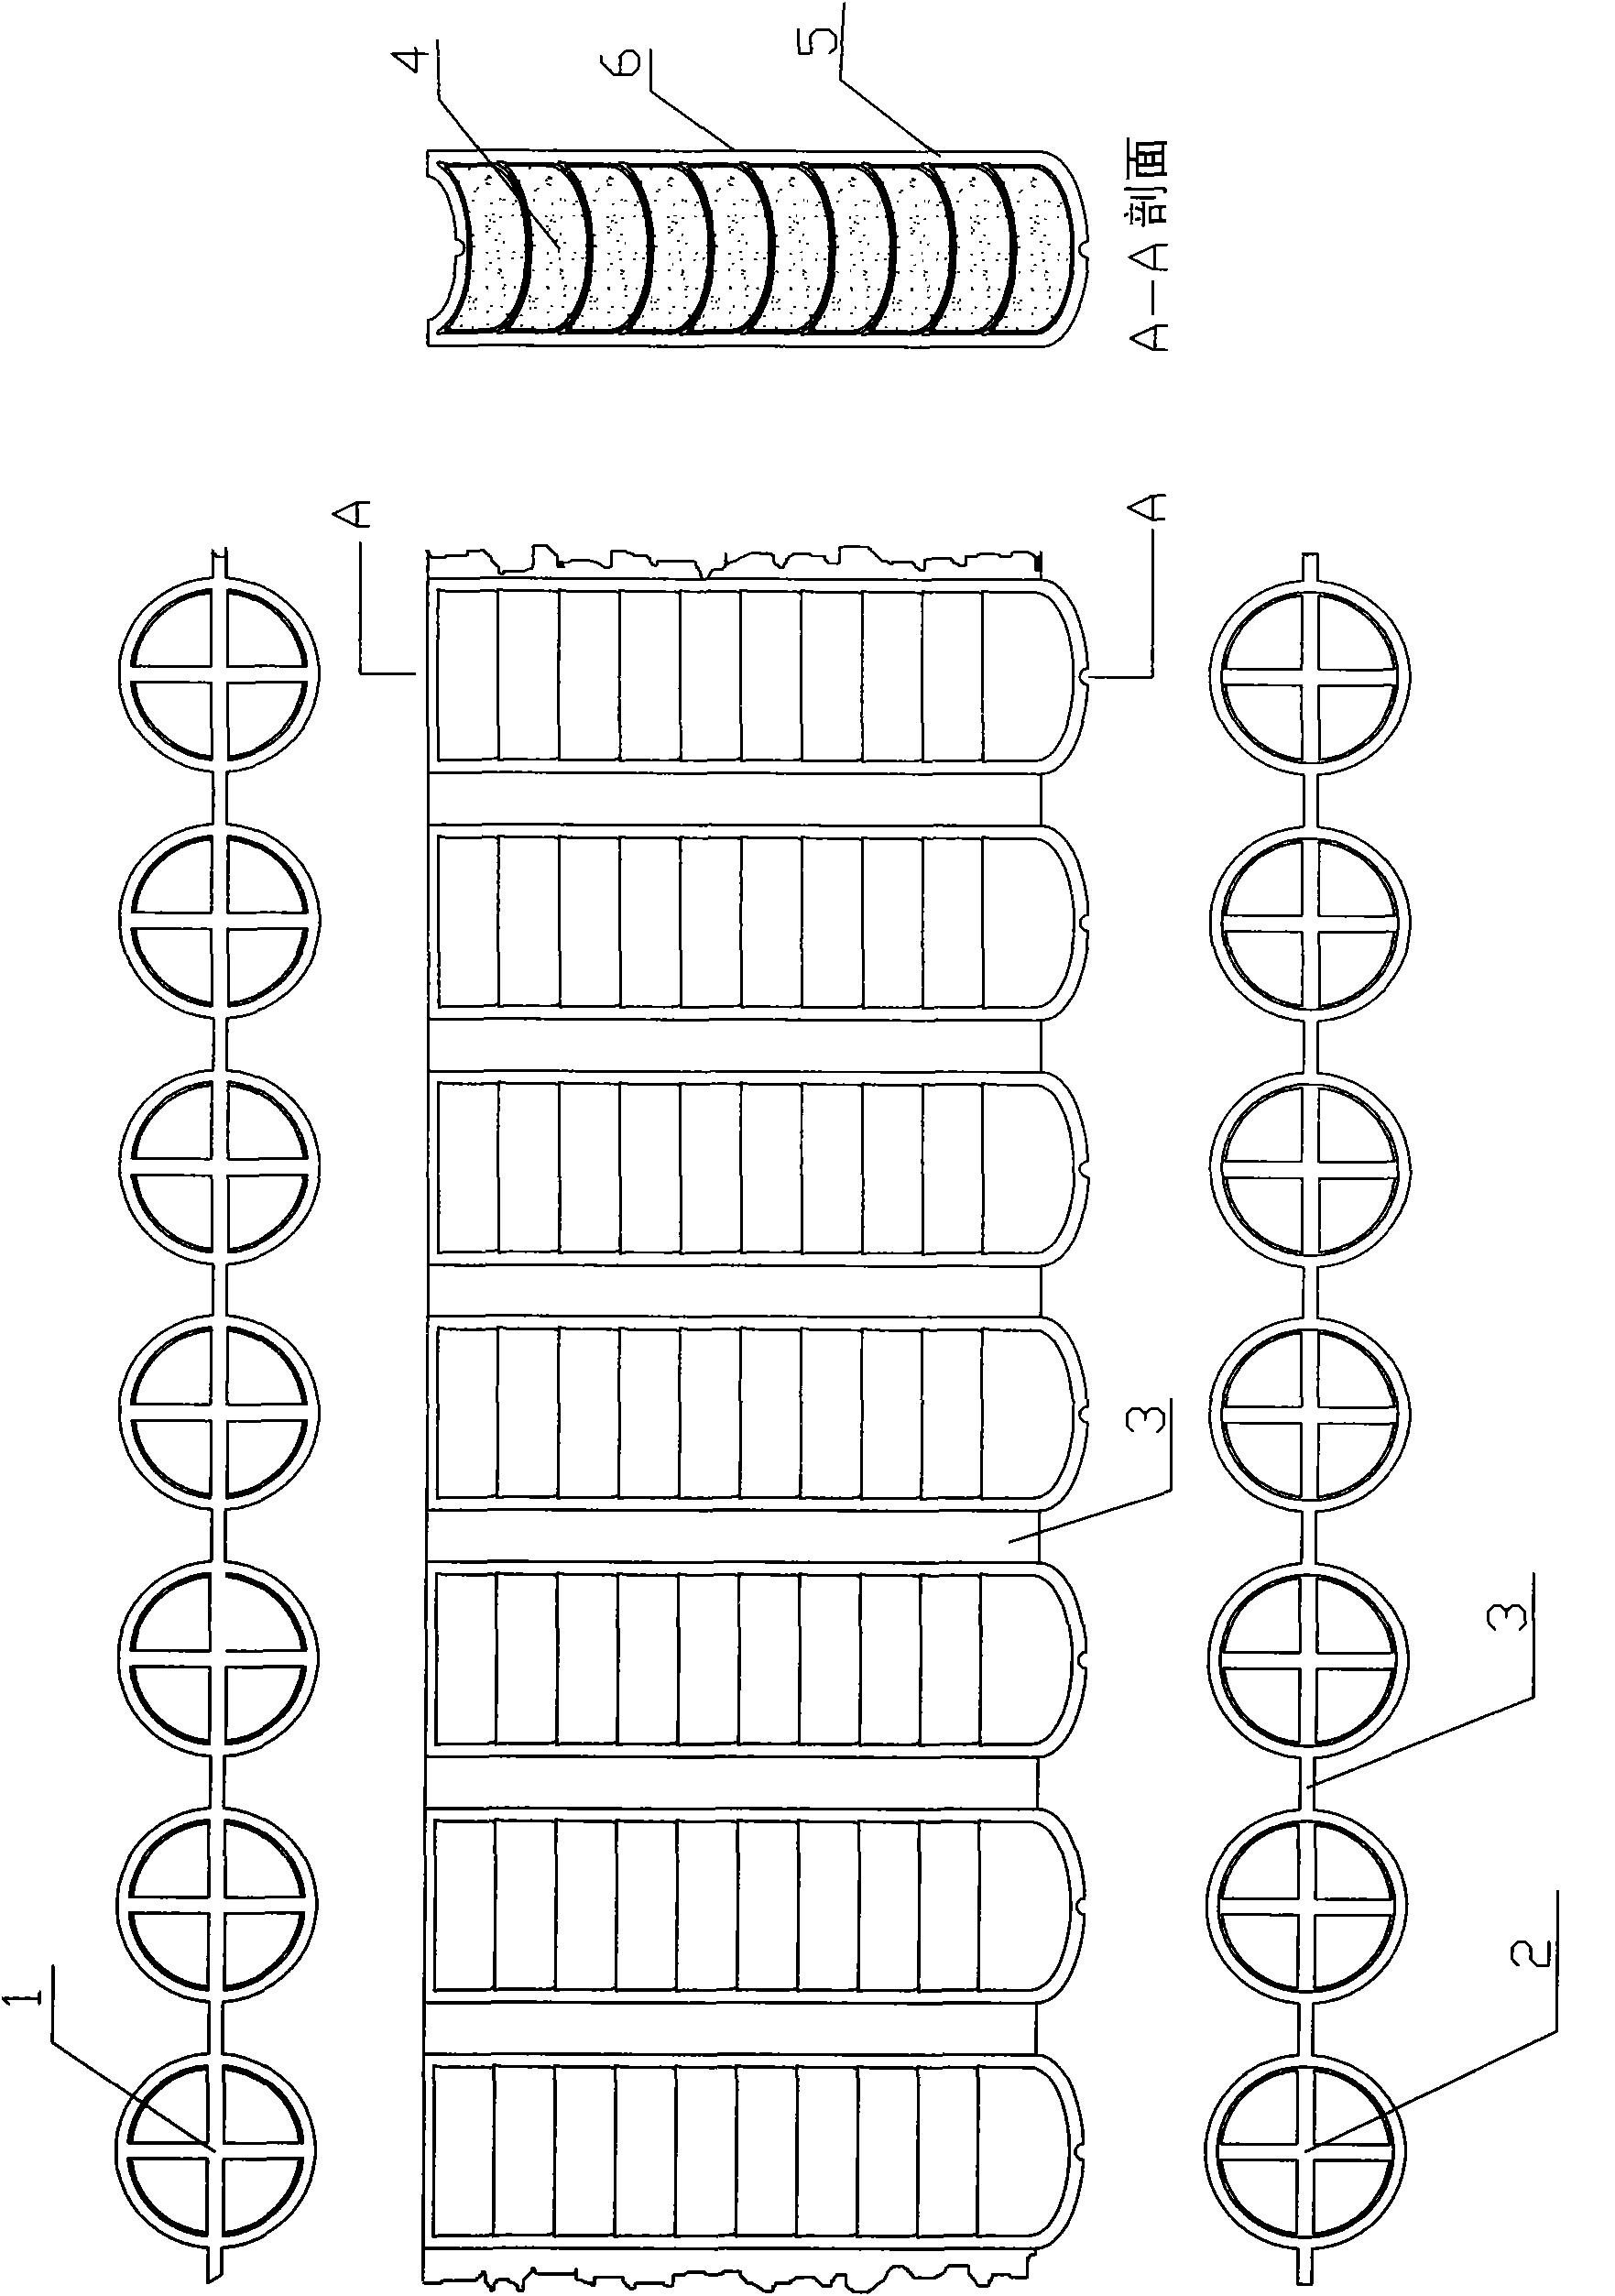 Metal/water/air reaction feedback type engine and high-speed sea flitting aircraft with diving function